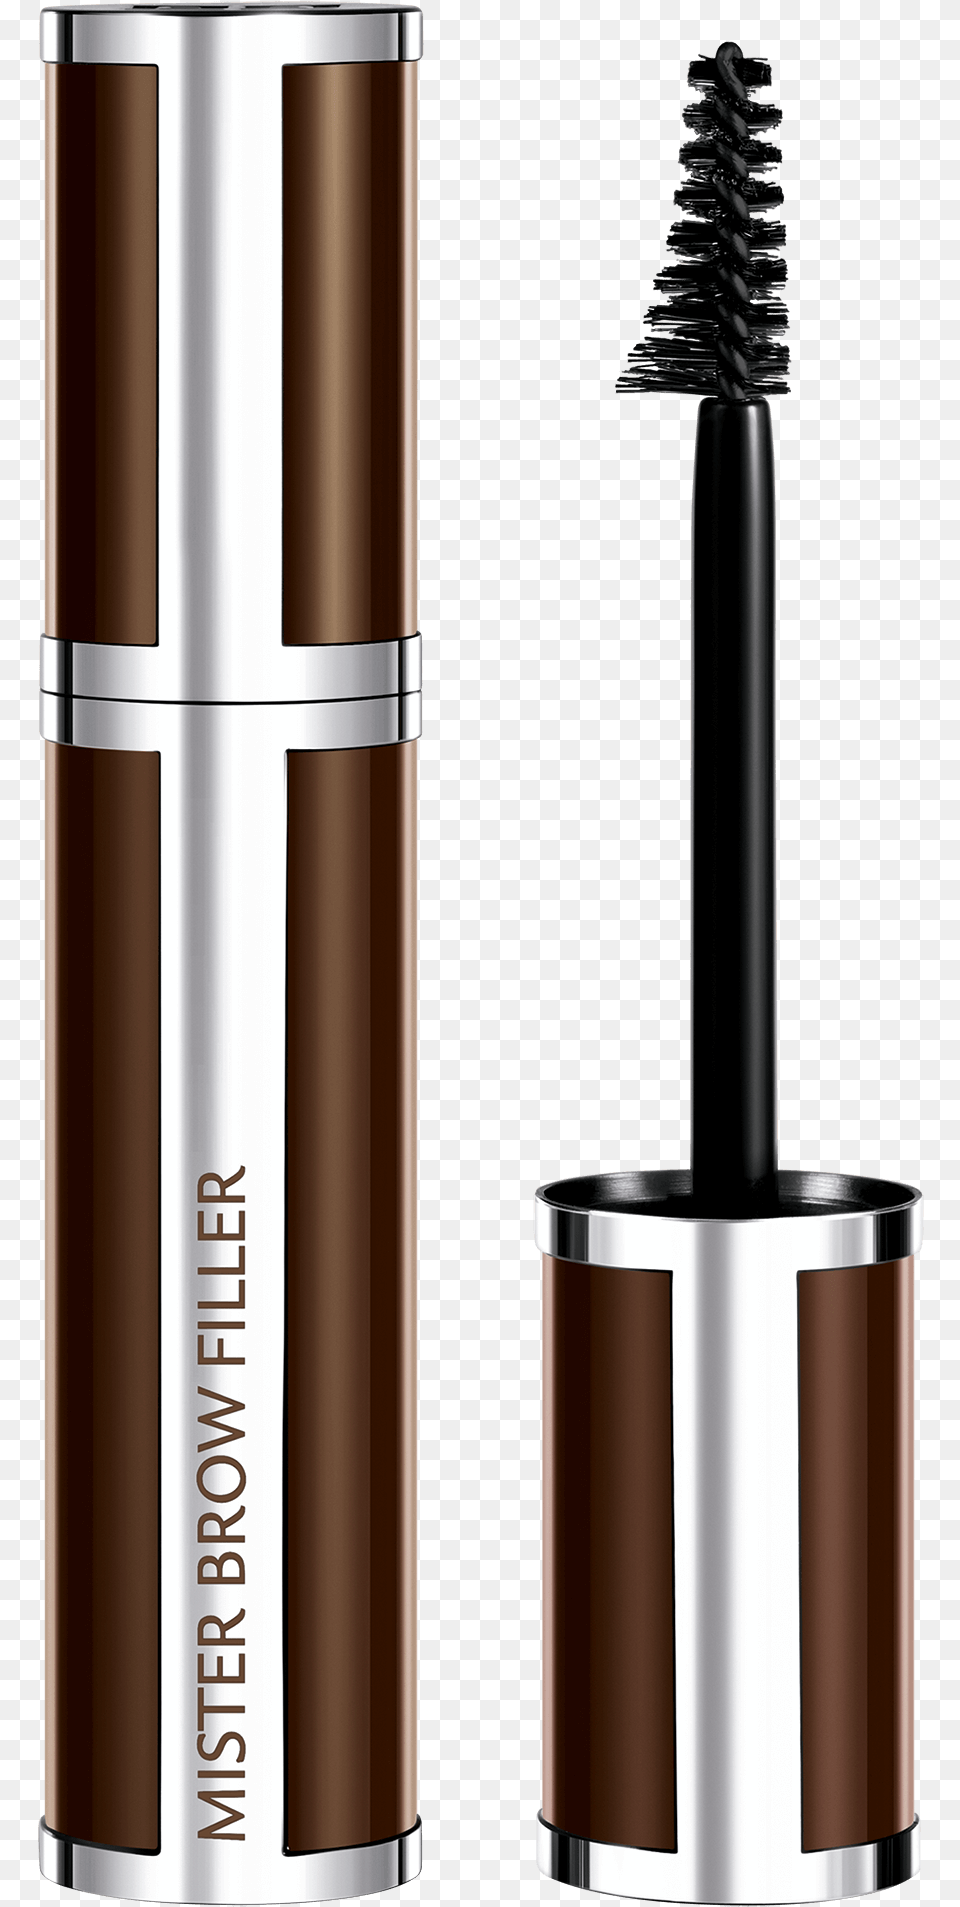 Mister Brow Filler Givenchy Givenchy Beauty Women39s Mr Brow Filler Mascara Black, Cosmetics, Bottle, Shaker, Smoke Pipe Png Image